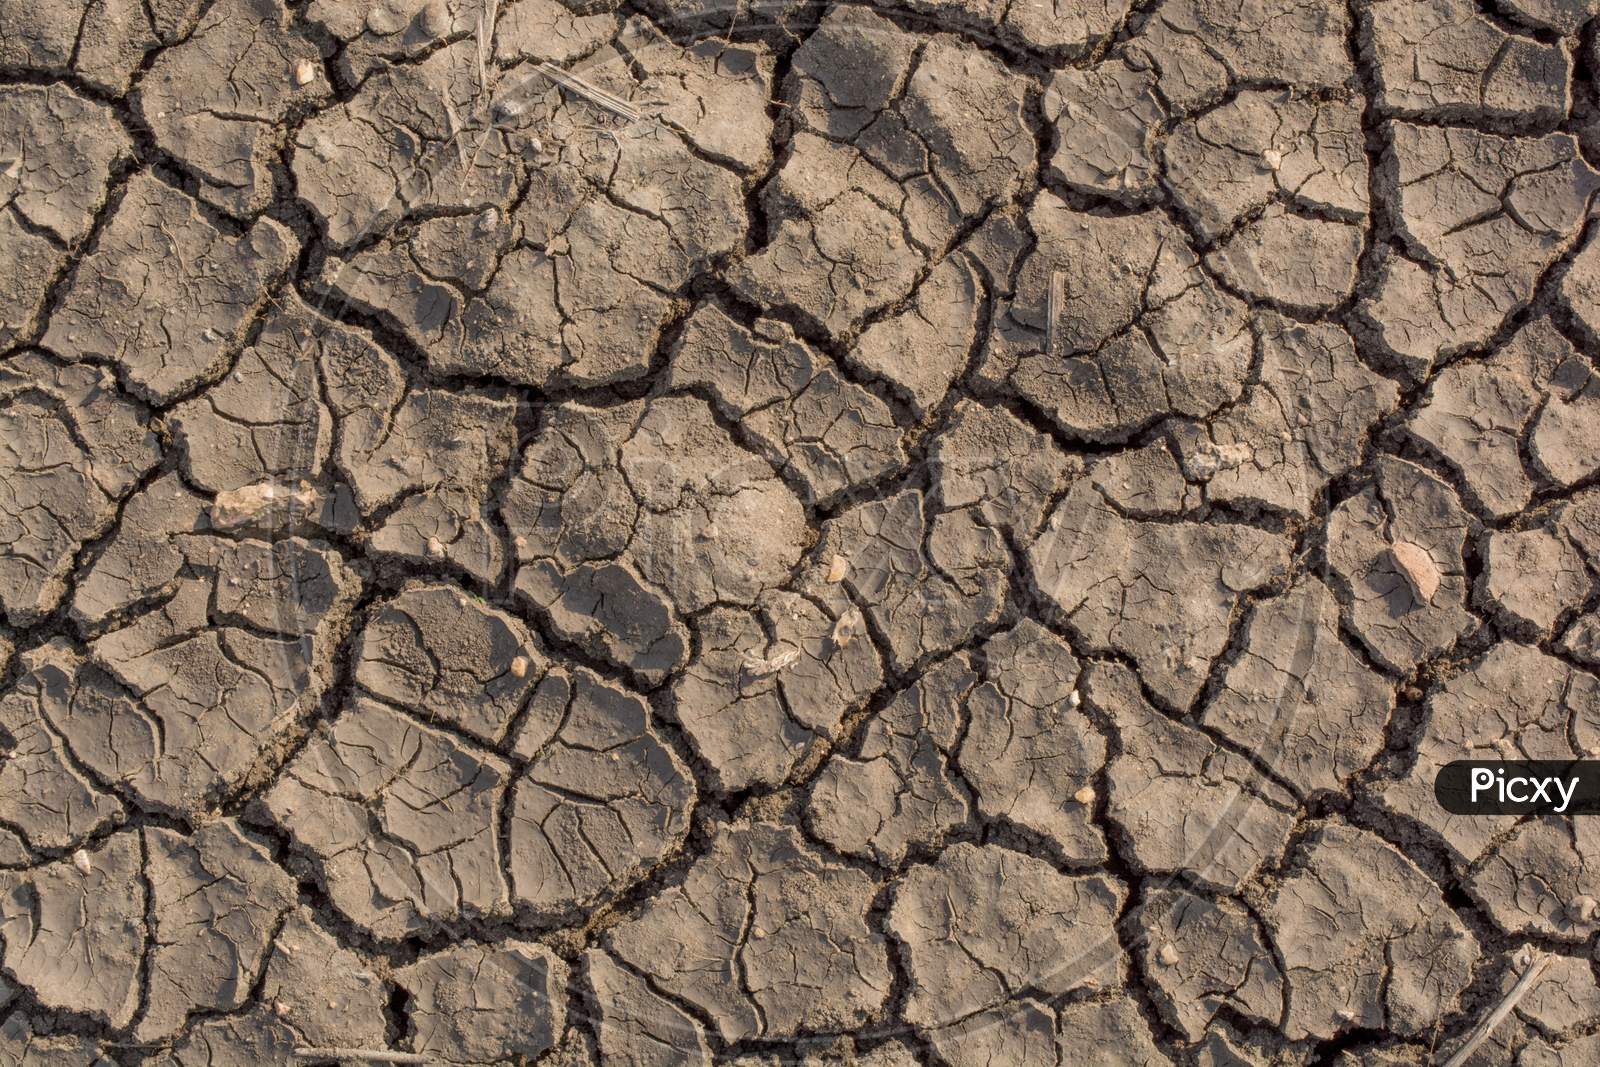 Dry Soil Arid,Drought Land Of India In Summer Seasion.